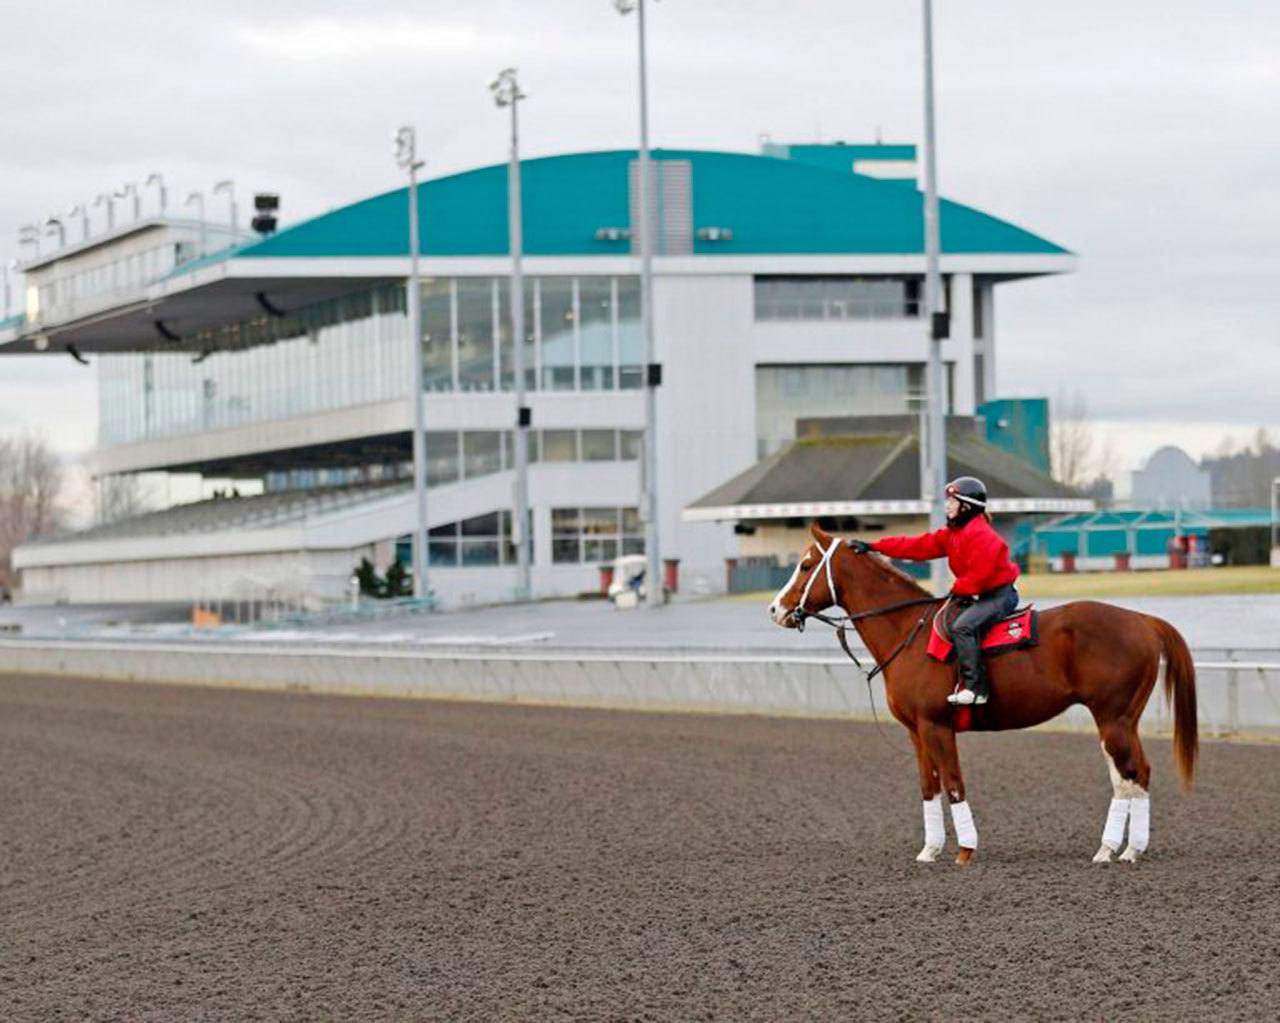 Barkley and jockey Jennifer Whitaker take to the well-groomed track at Emerald Downs on Monday, the first official day of training at the Auburn oval. COURTESY PHOTO, Emerald Downs